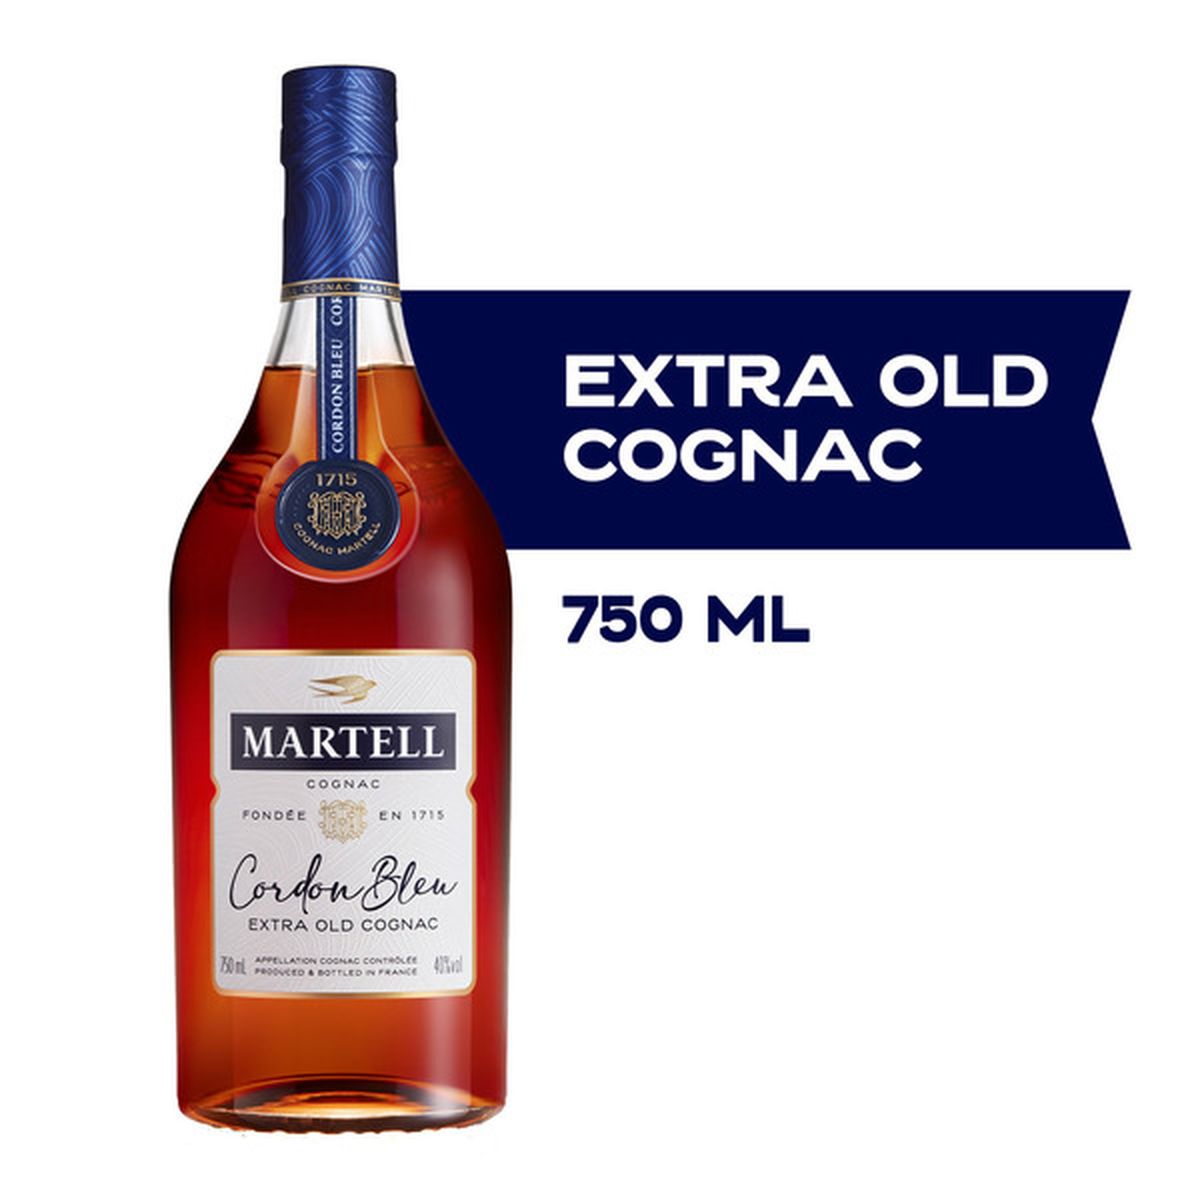 Martell Cordon Bleu Cognac 750mL, 80 Proof (750 ml) Delivery or